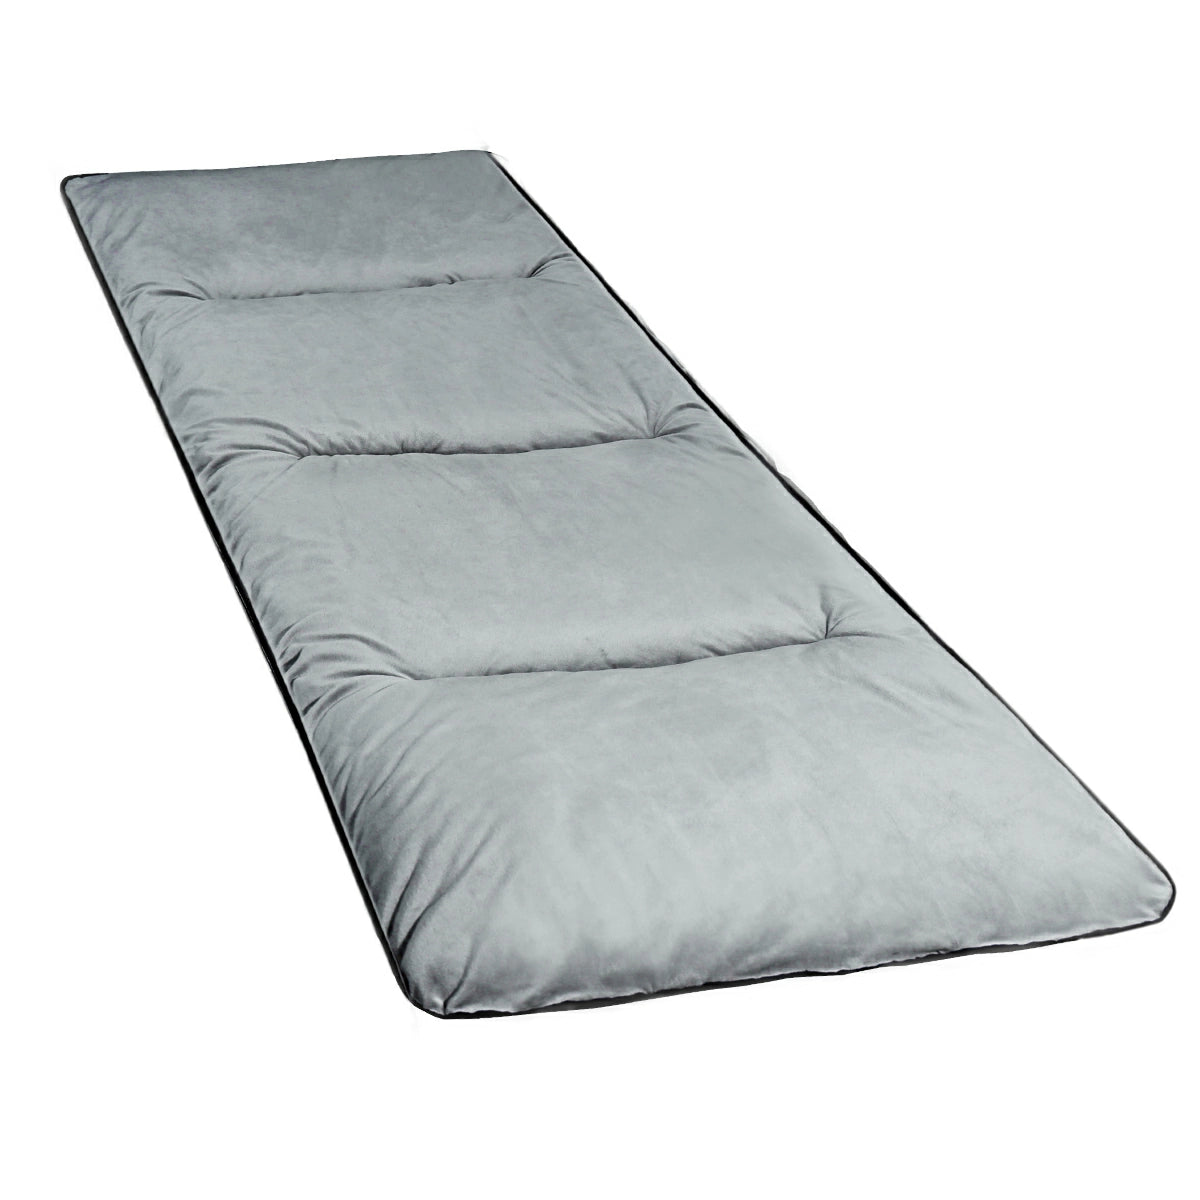 Portable Folding Sleeping Cot Mattress Pads for Camping,Gray Blue Black Brown